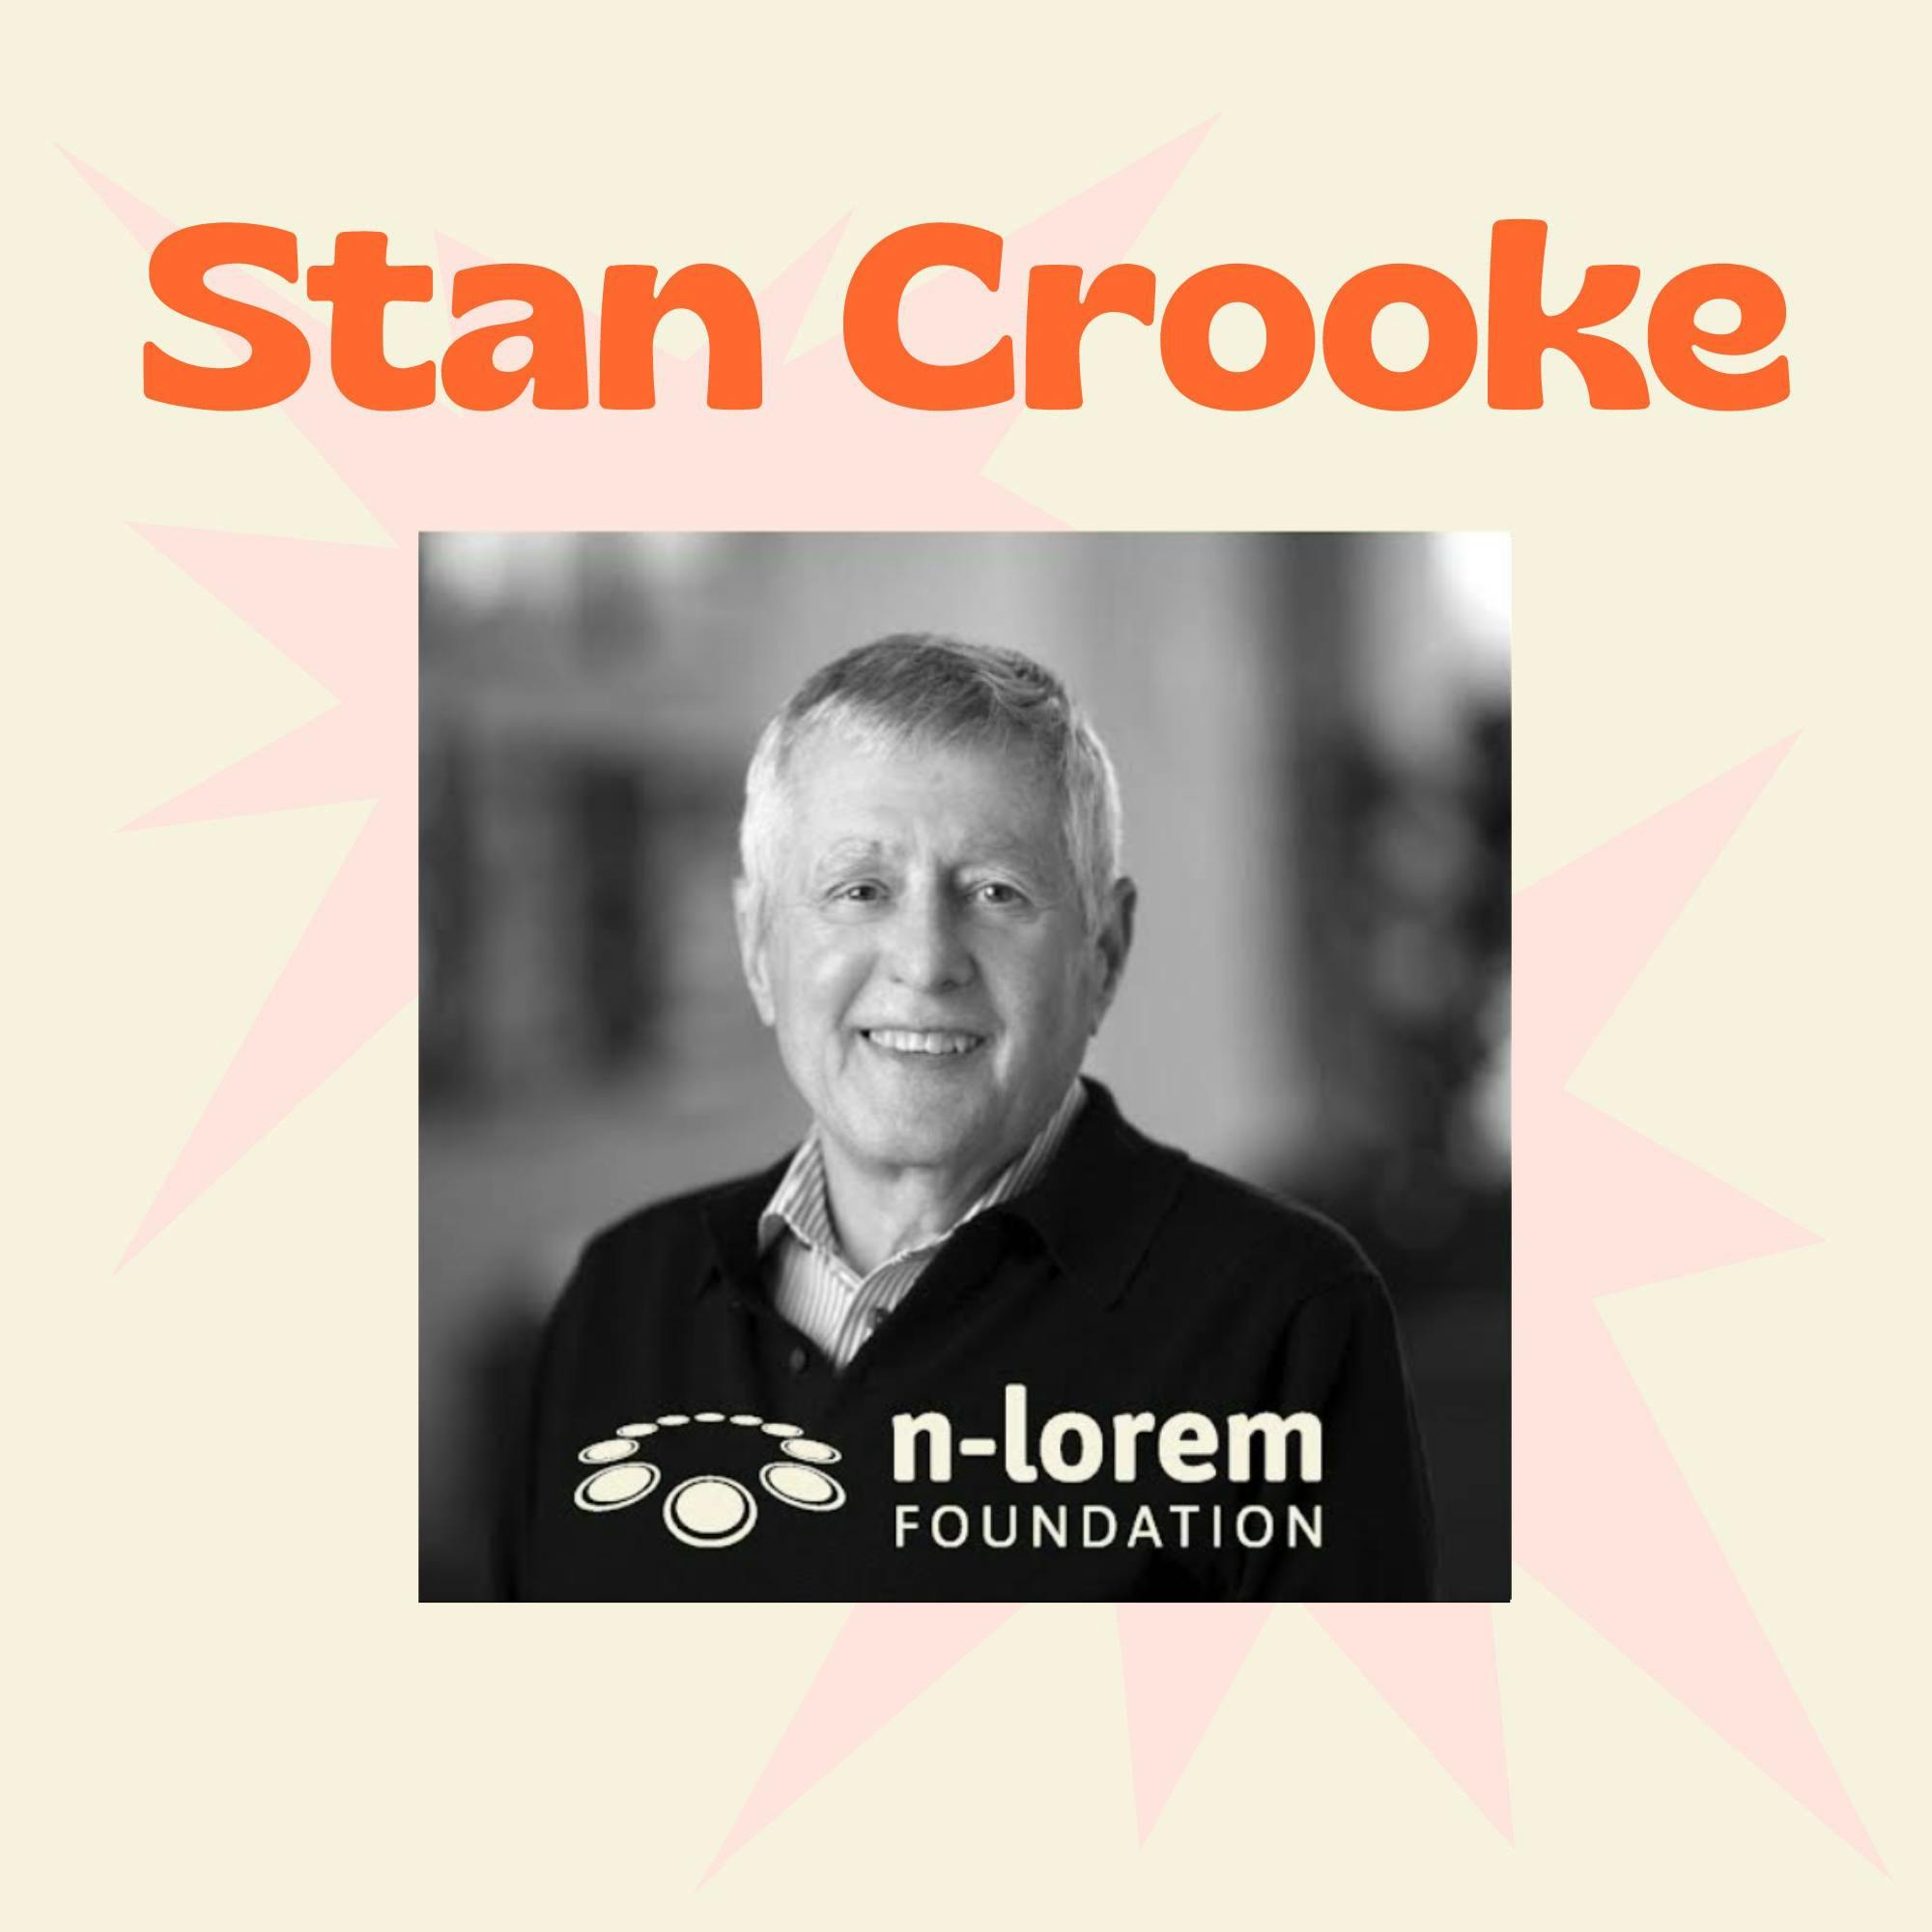 Every Patient Matters – Discovering, Developing, and Providing Experimental ASO Treatments to Nano-Rare Patients for Free with n-Lorem Founder and CEO Stan Crooke